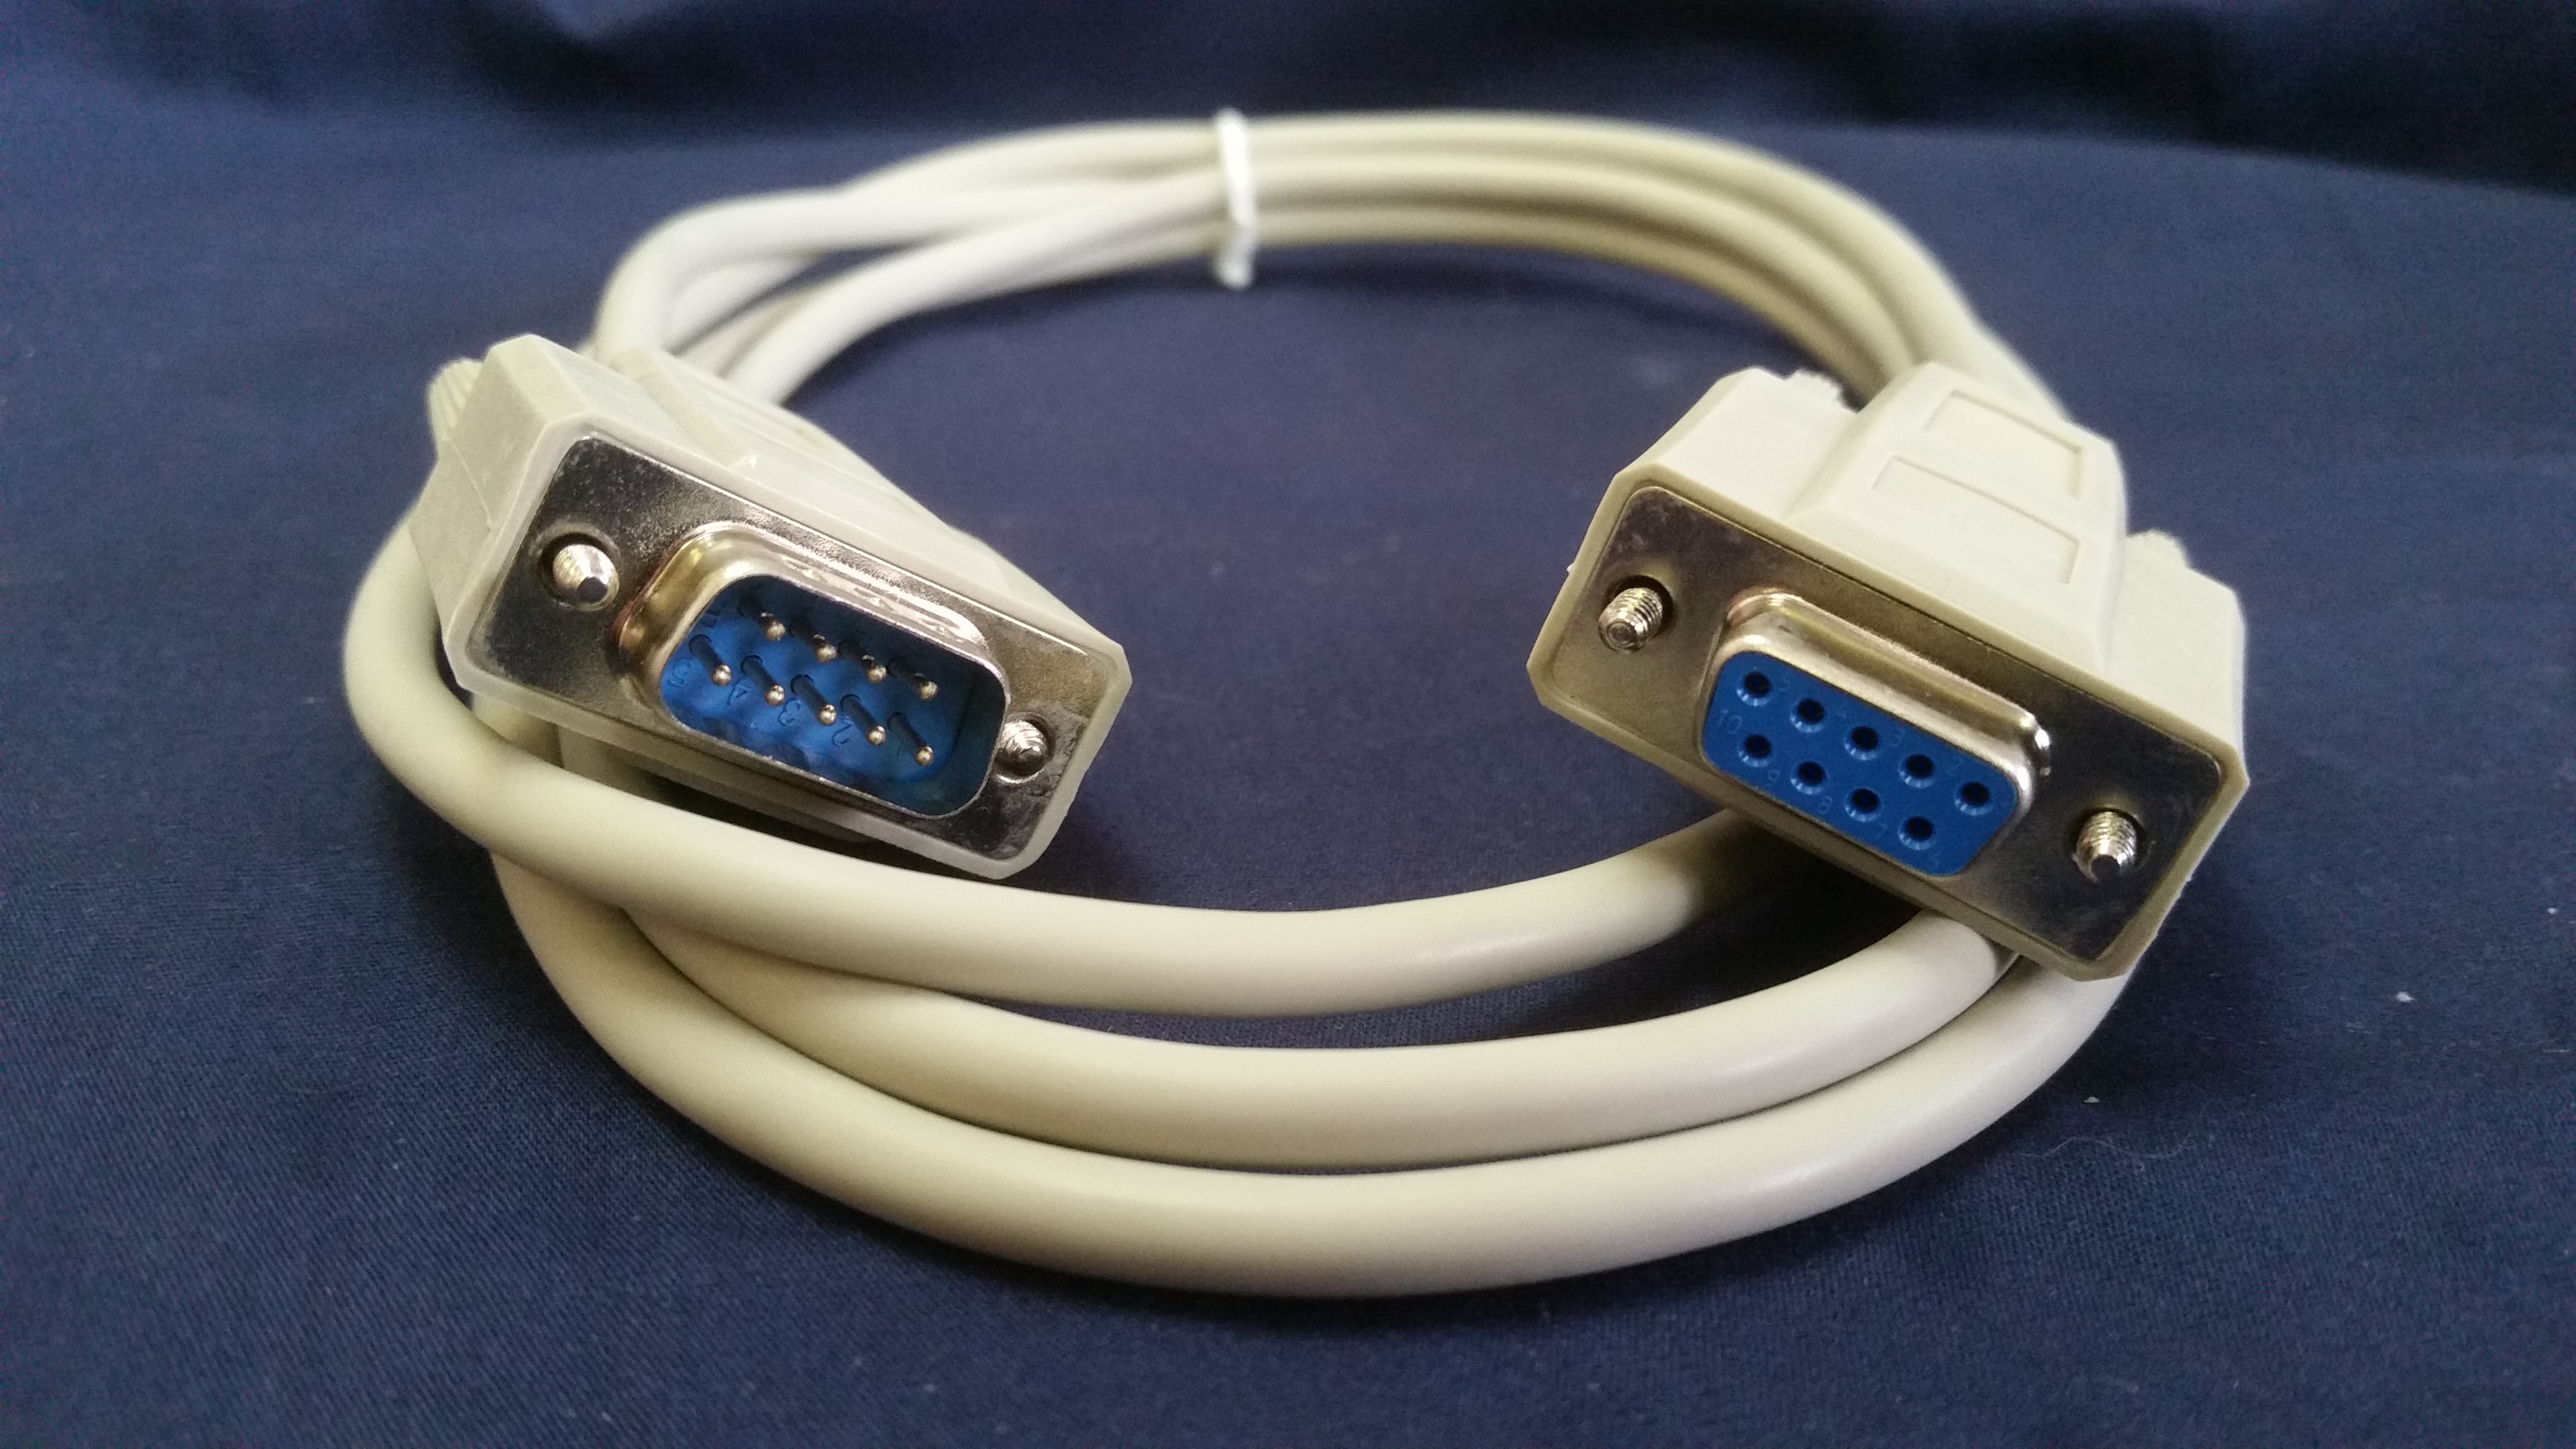 RS-232 cable with DB-9 connectors